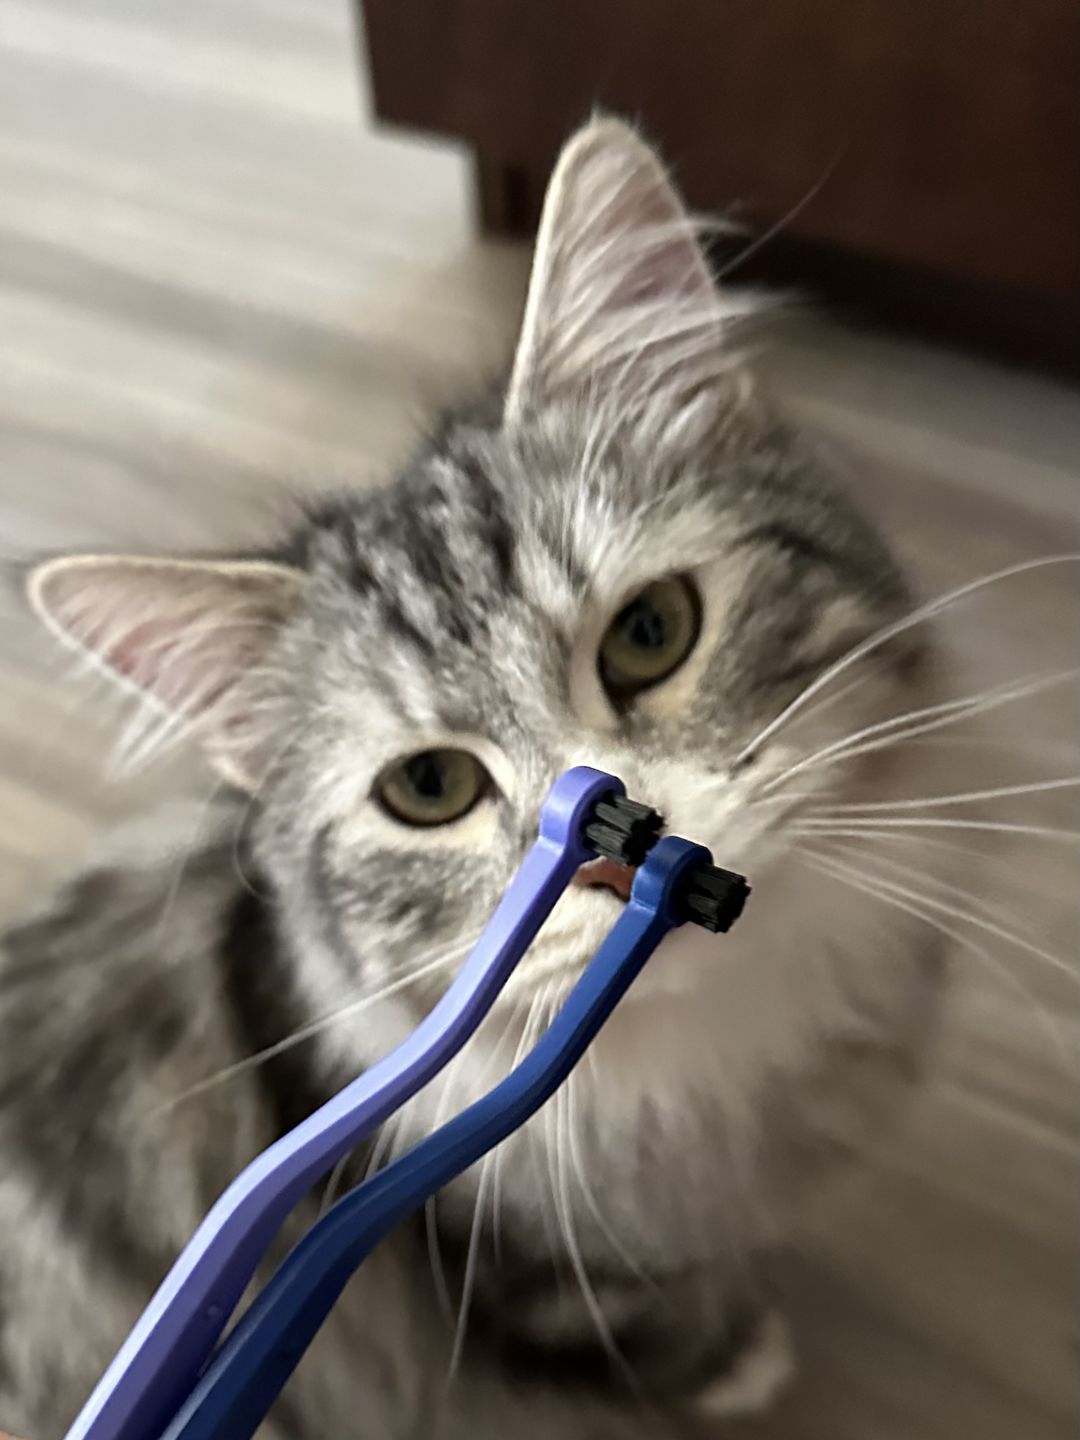 We’ve tried several brushes before, but we love these brushes for our two cats! Very easy to use and great at reaching the areas that are hard to get to.